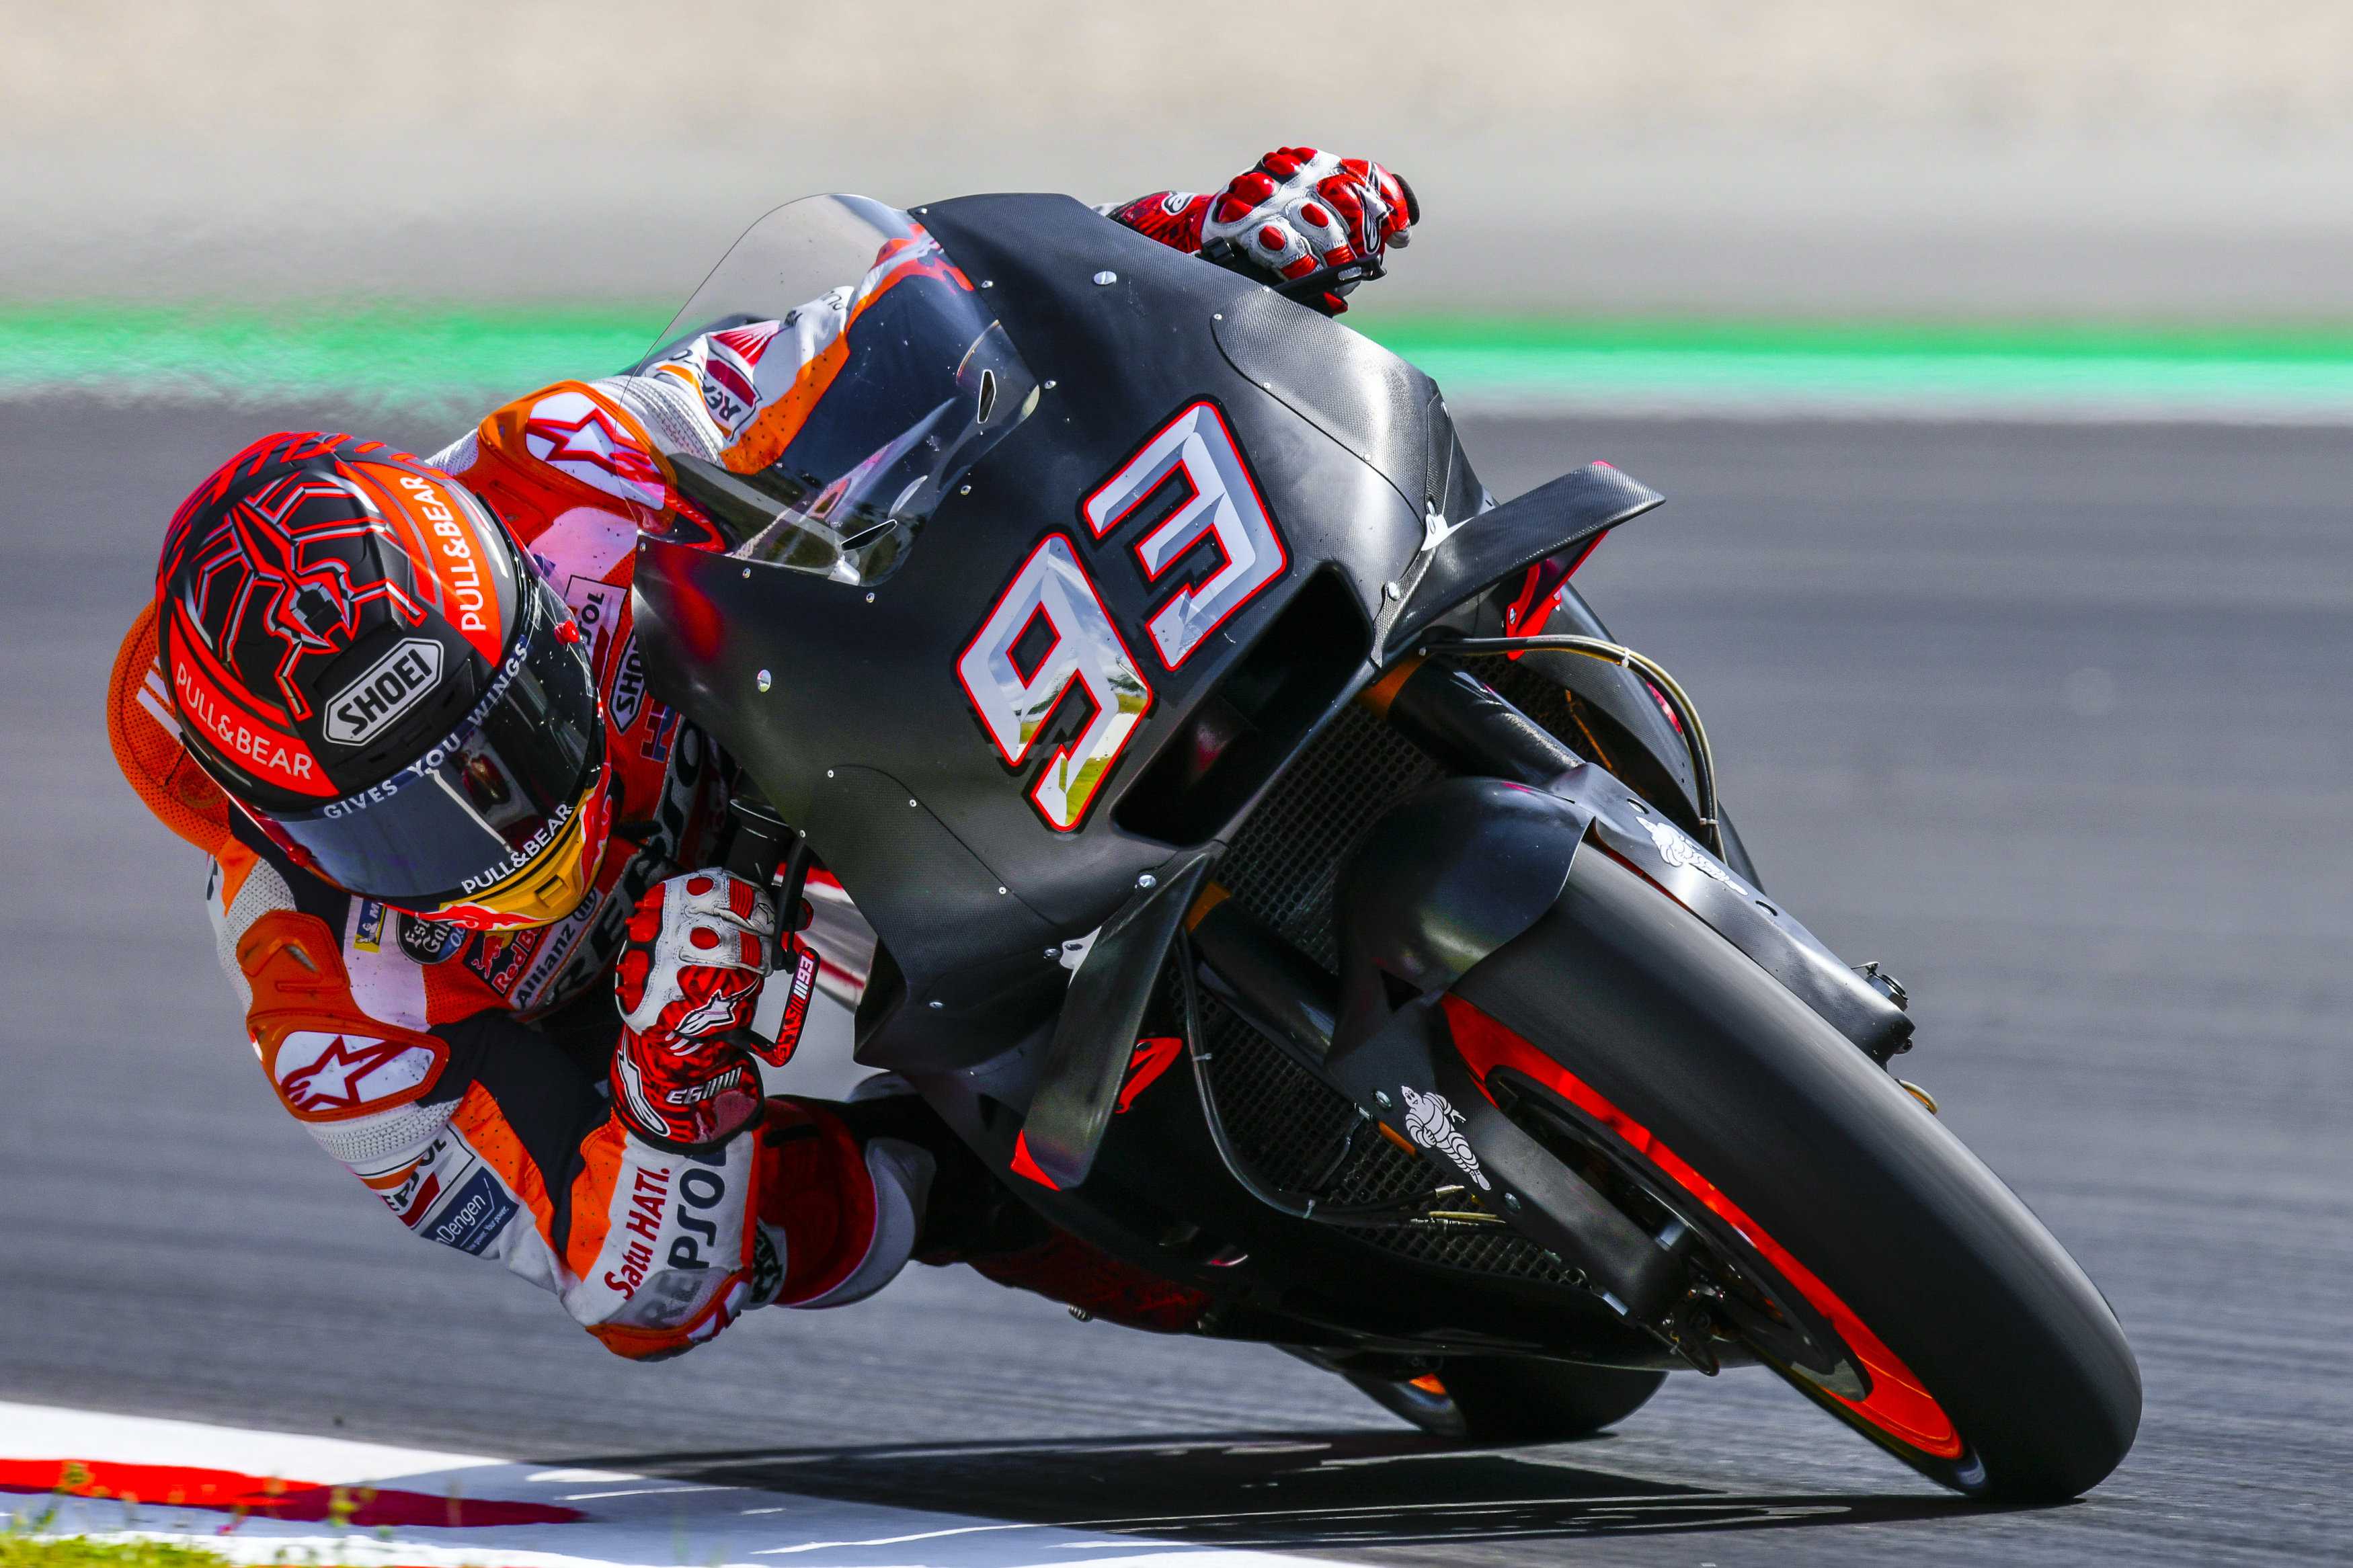 Marquez now 'looking for final three tenths' on Ducati MotoGP bike